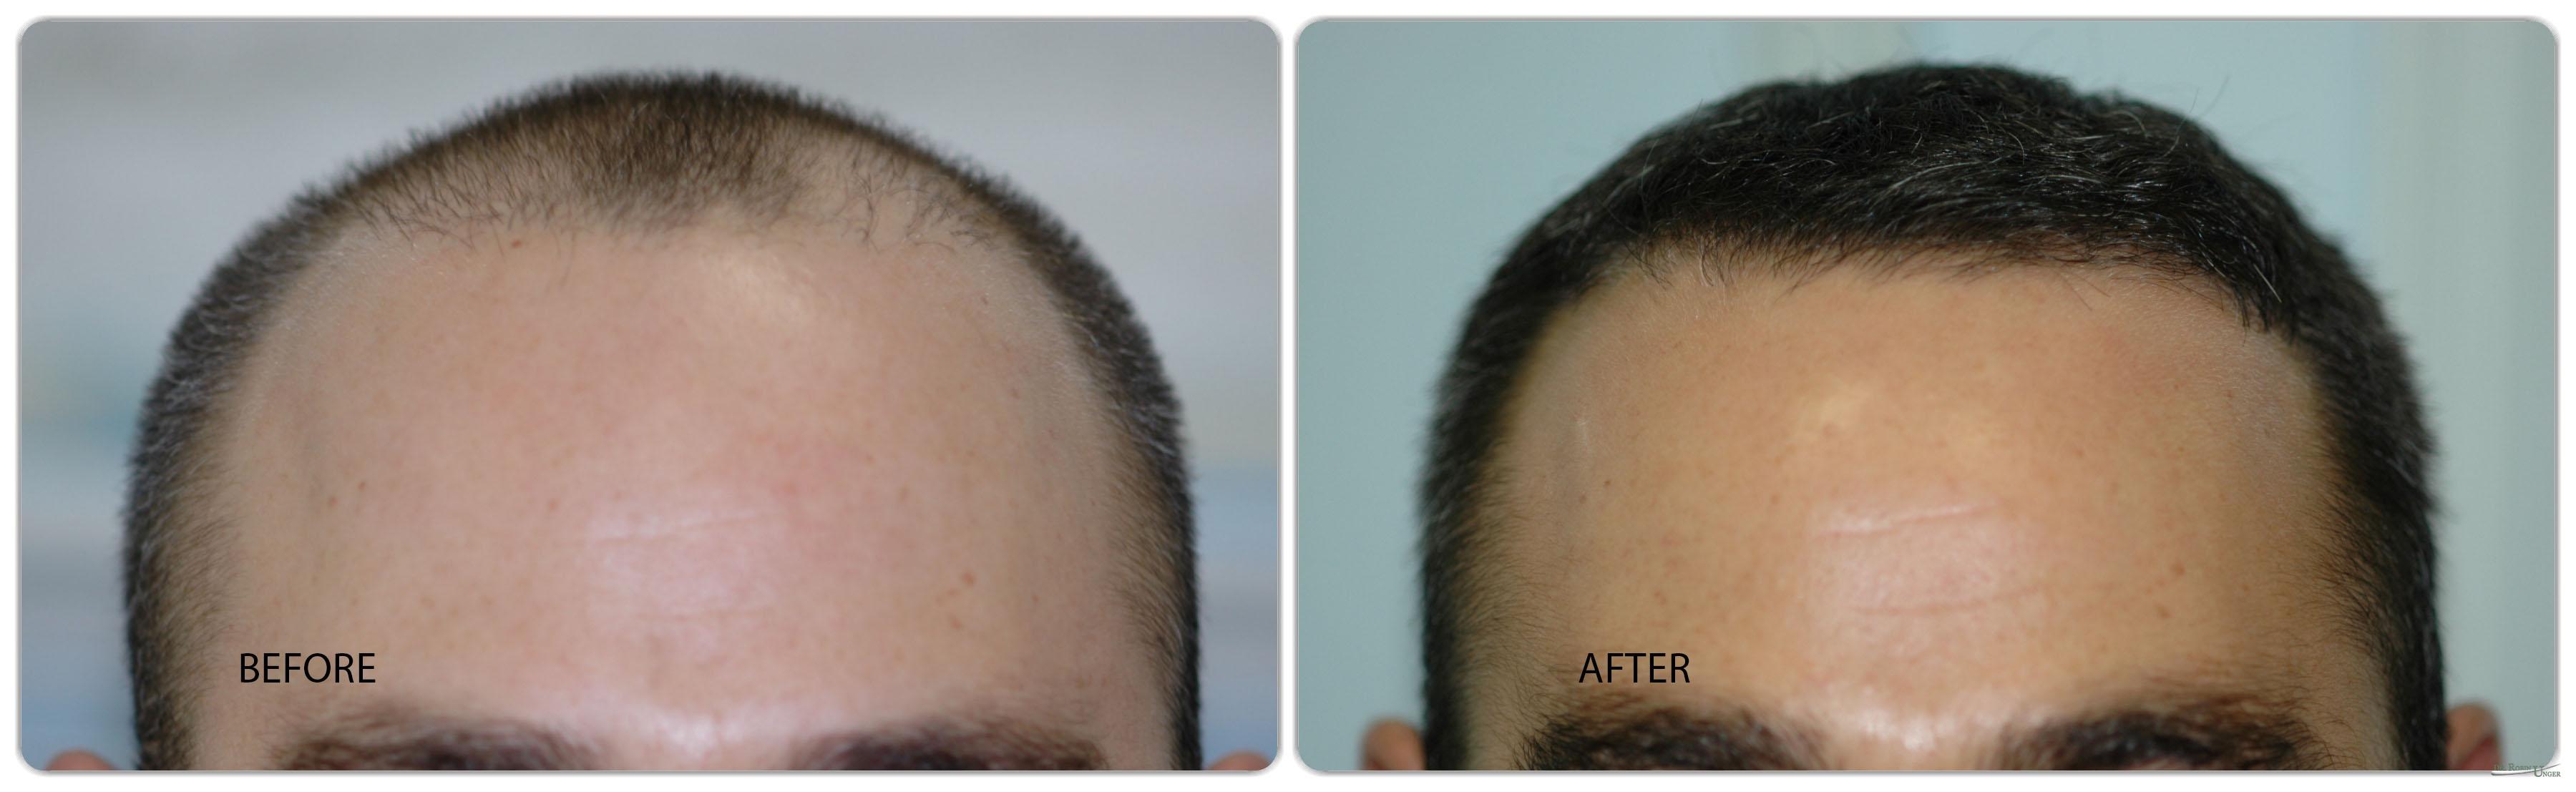 Male Hair Transplant for 36 Year Old | Dr. Robin Unger | Dr. Robin Unger | Hair  Transplant Specialist